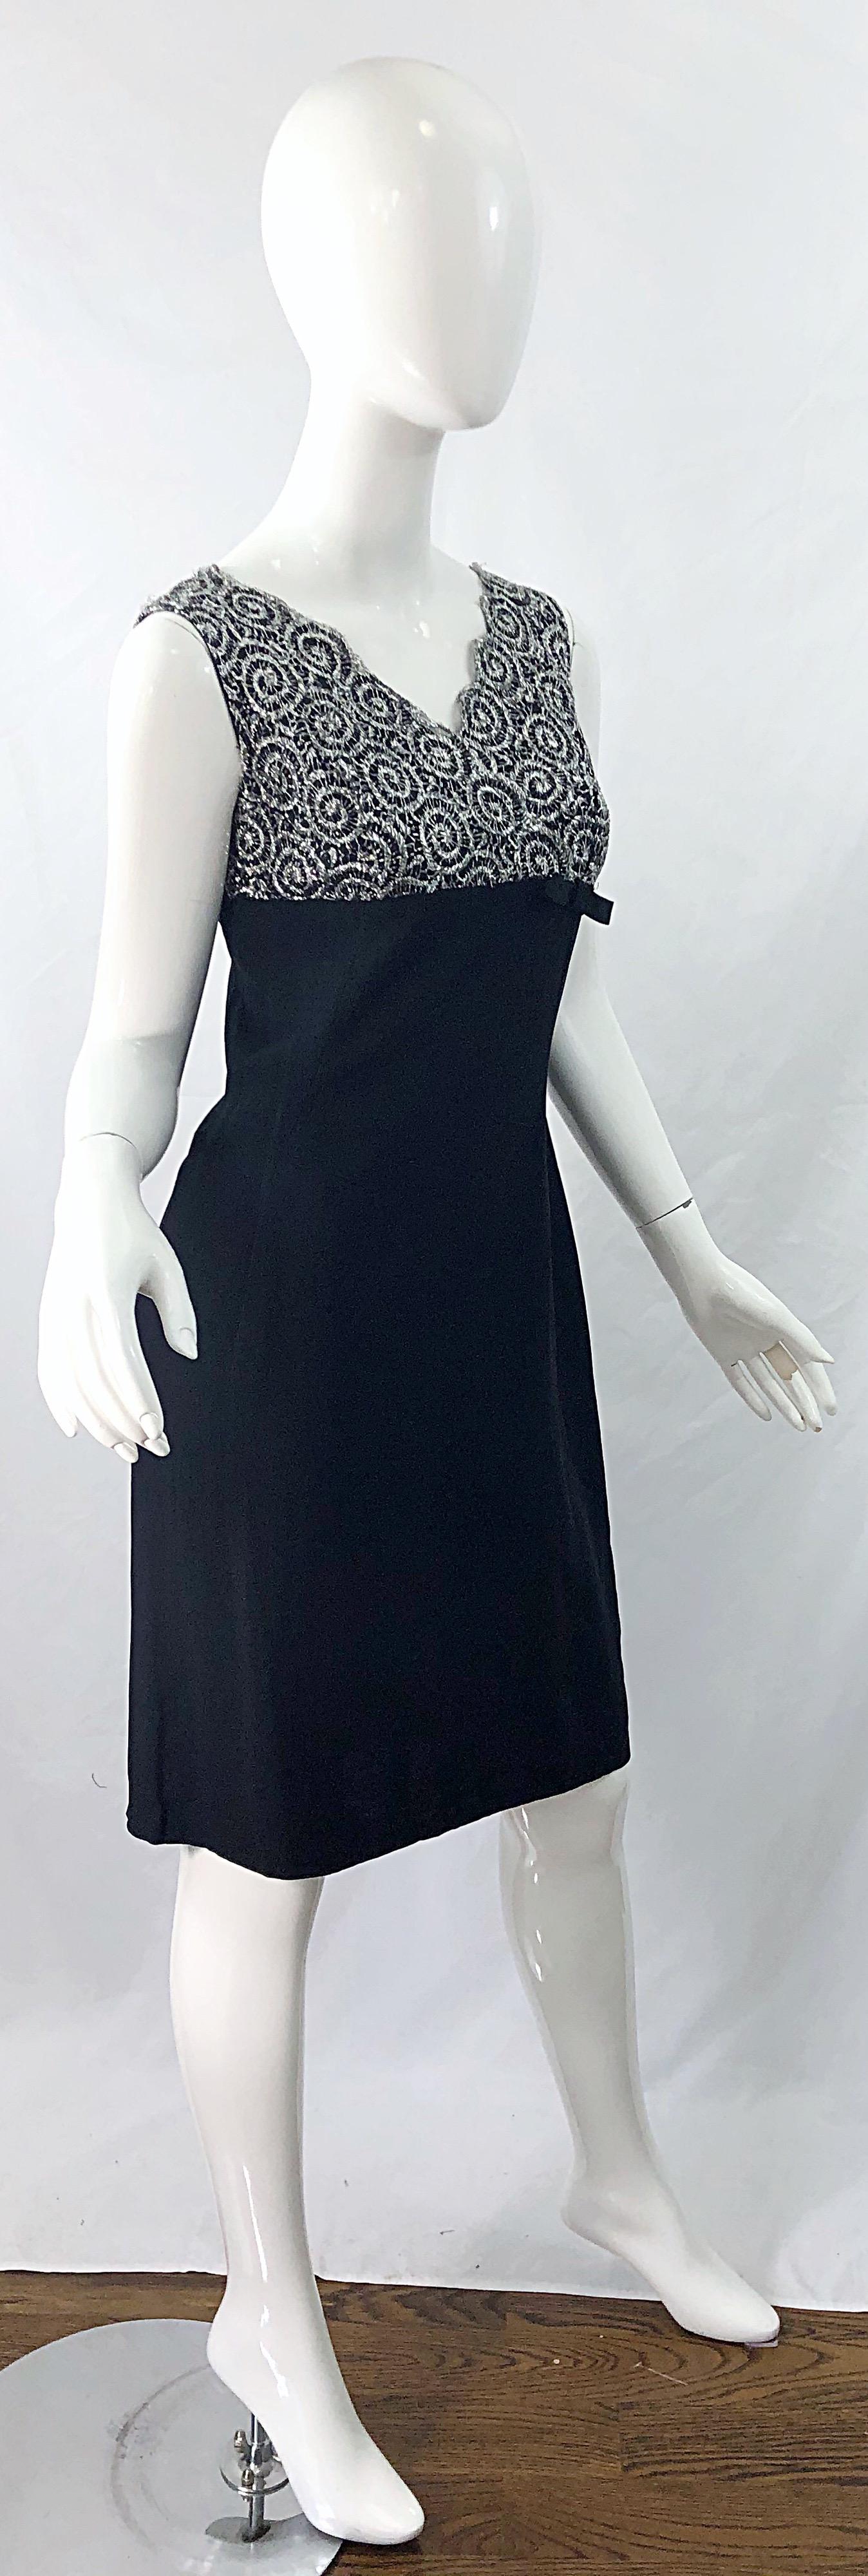 Chic 1960s Black and Silver Metallic Lace Rayon Crepe Vintage 60s Sheath Dress For Sale 4